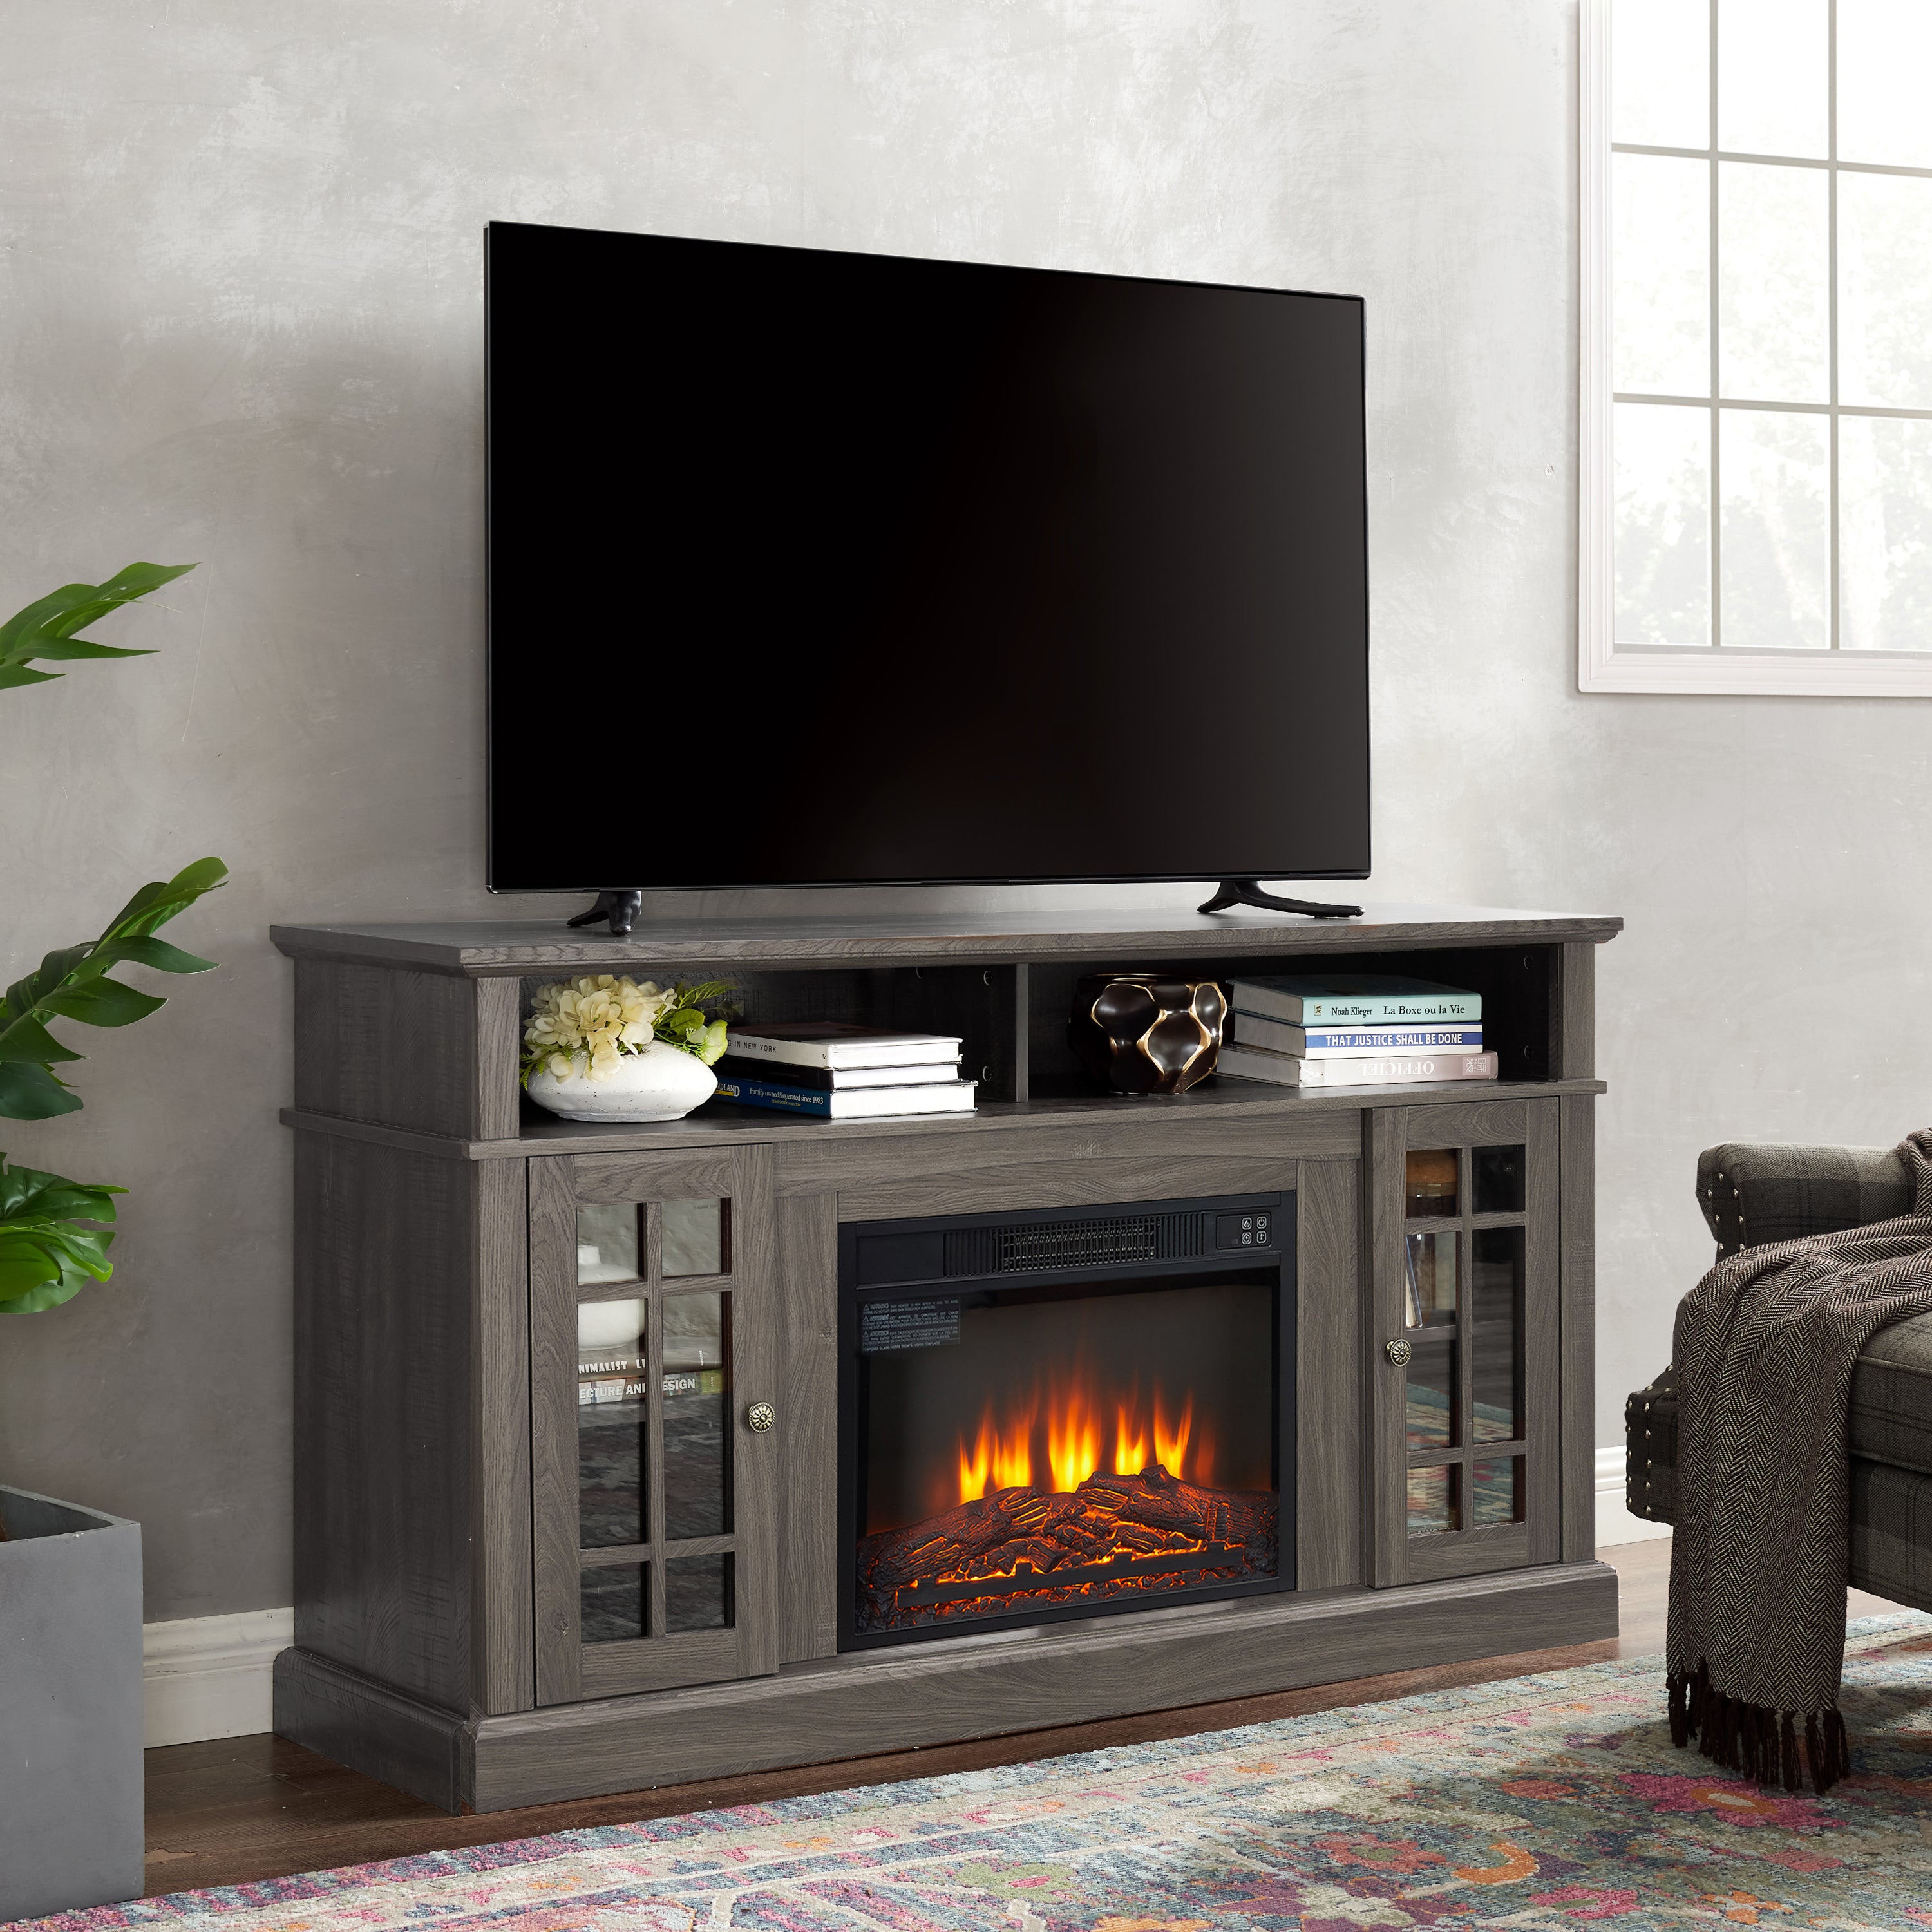 Modern TV Media Stand With Insert Fireplace